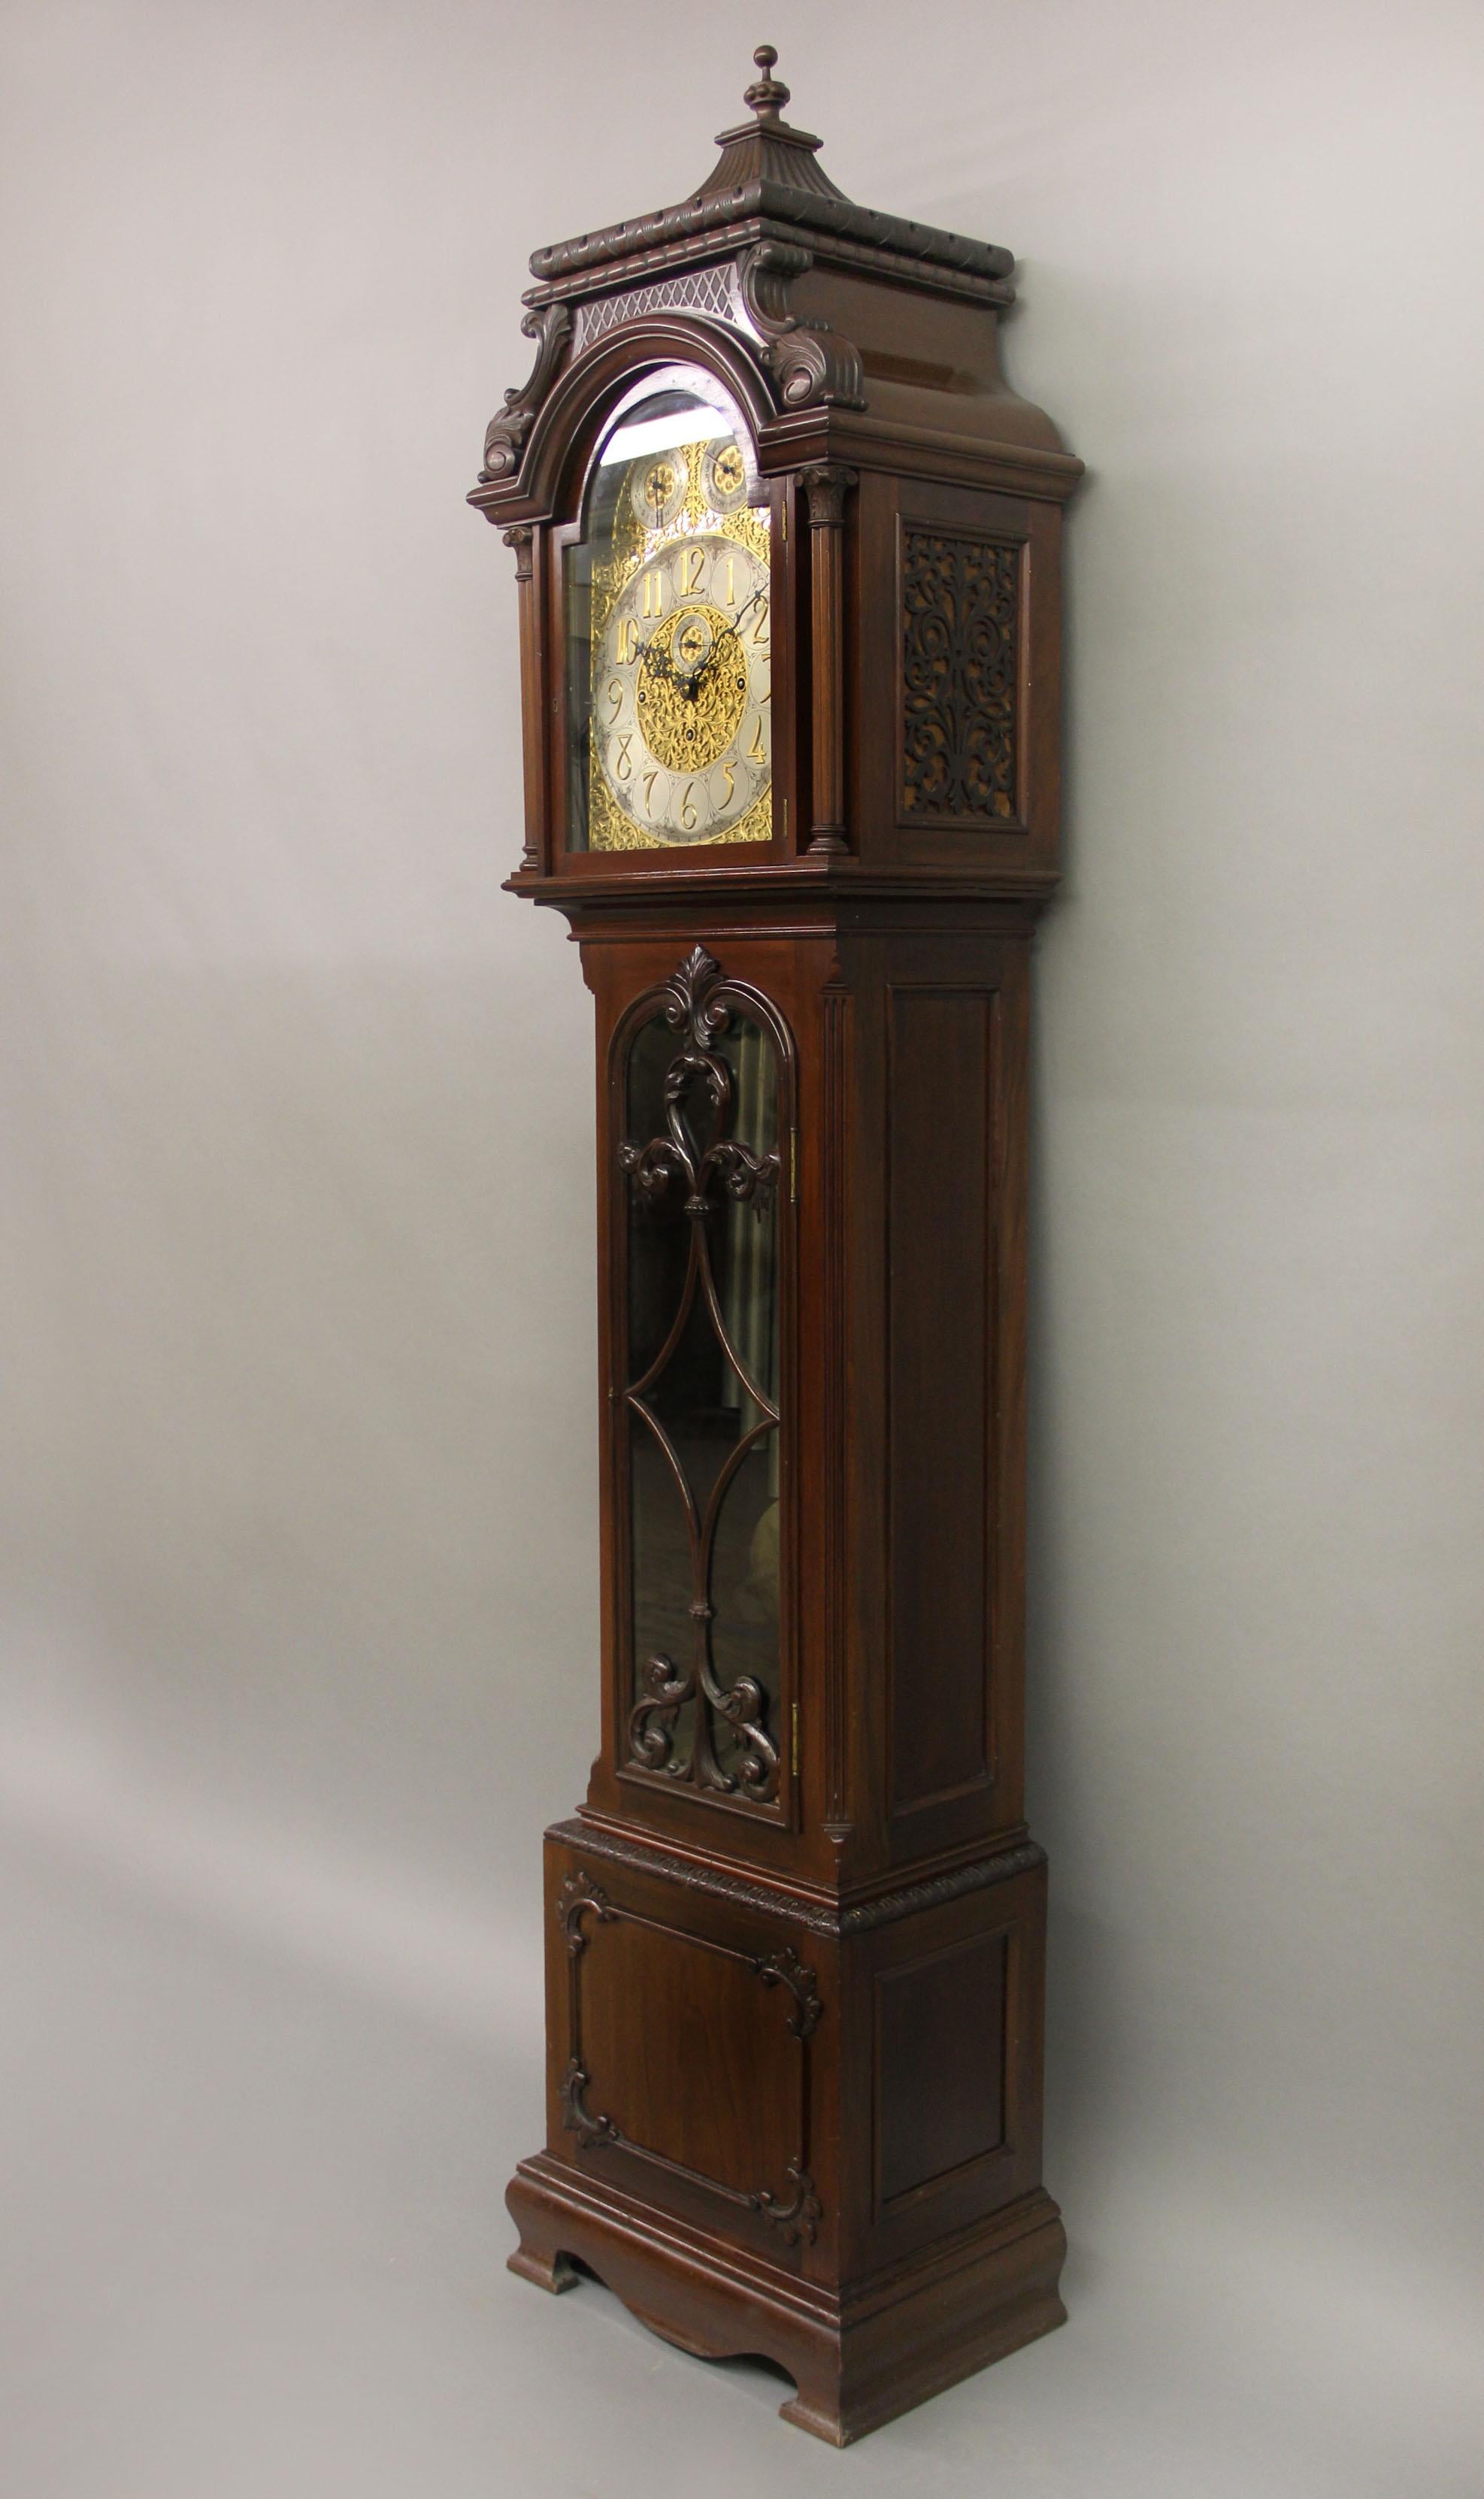 A fine late 19th century English carved nine tube longcase grandfather clock

The clock with an eight day movement and chiming on nine tubes. The very elaborate designed face with Arabic Numerals enclosing a subsidiary seconds dial in the center,